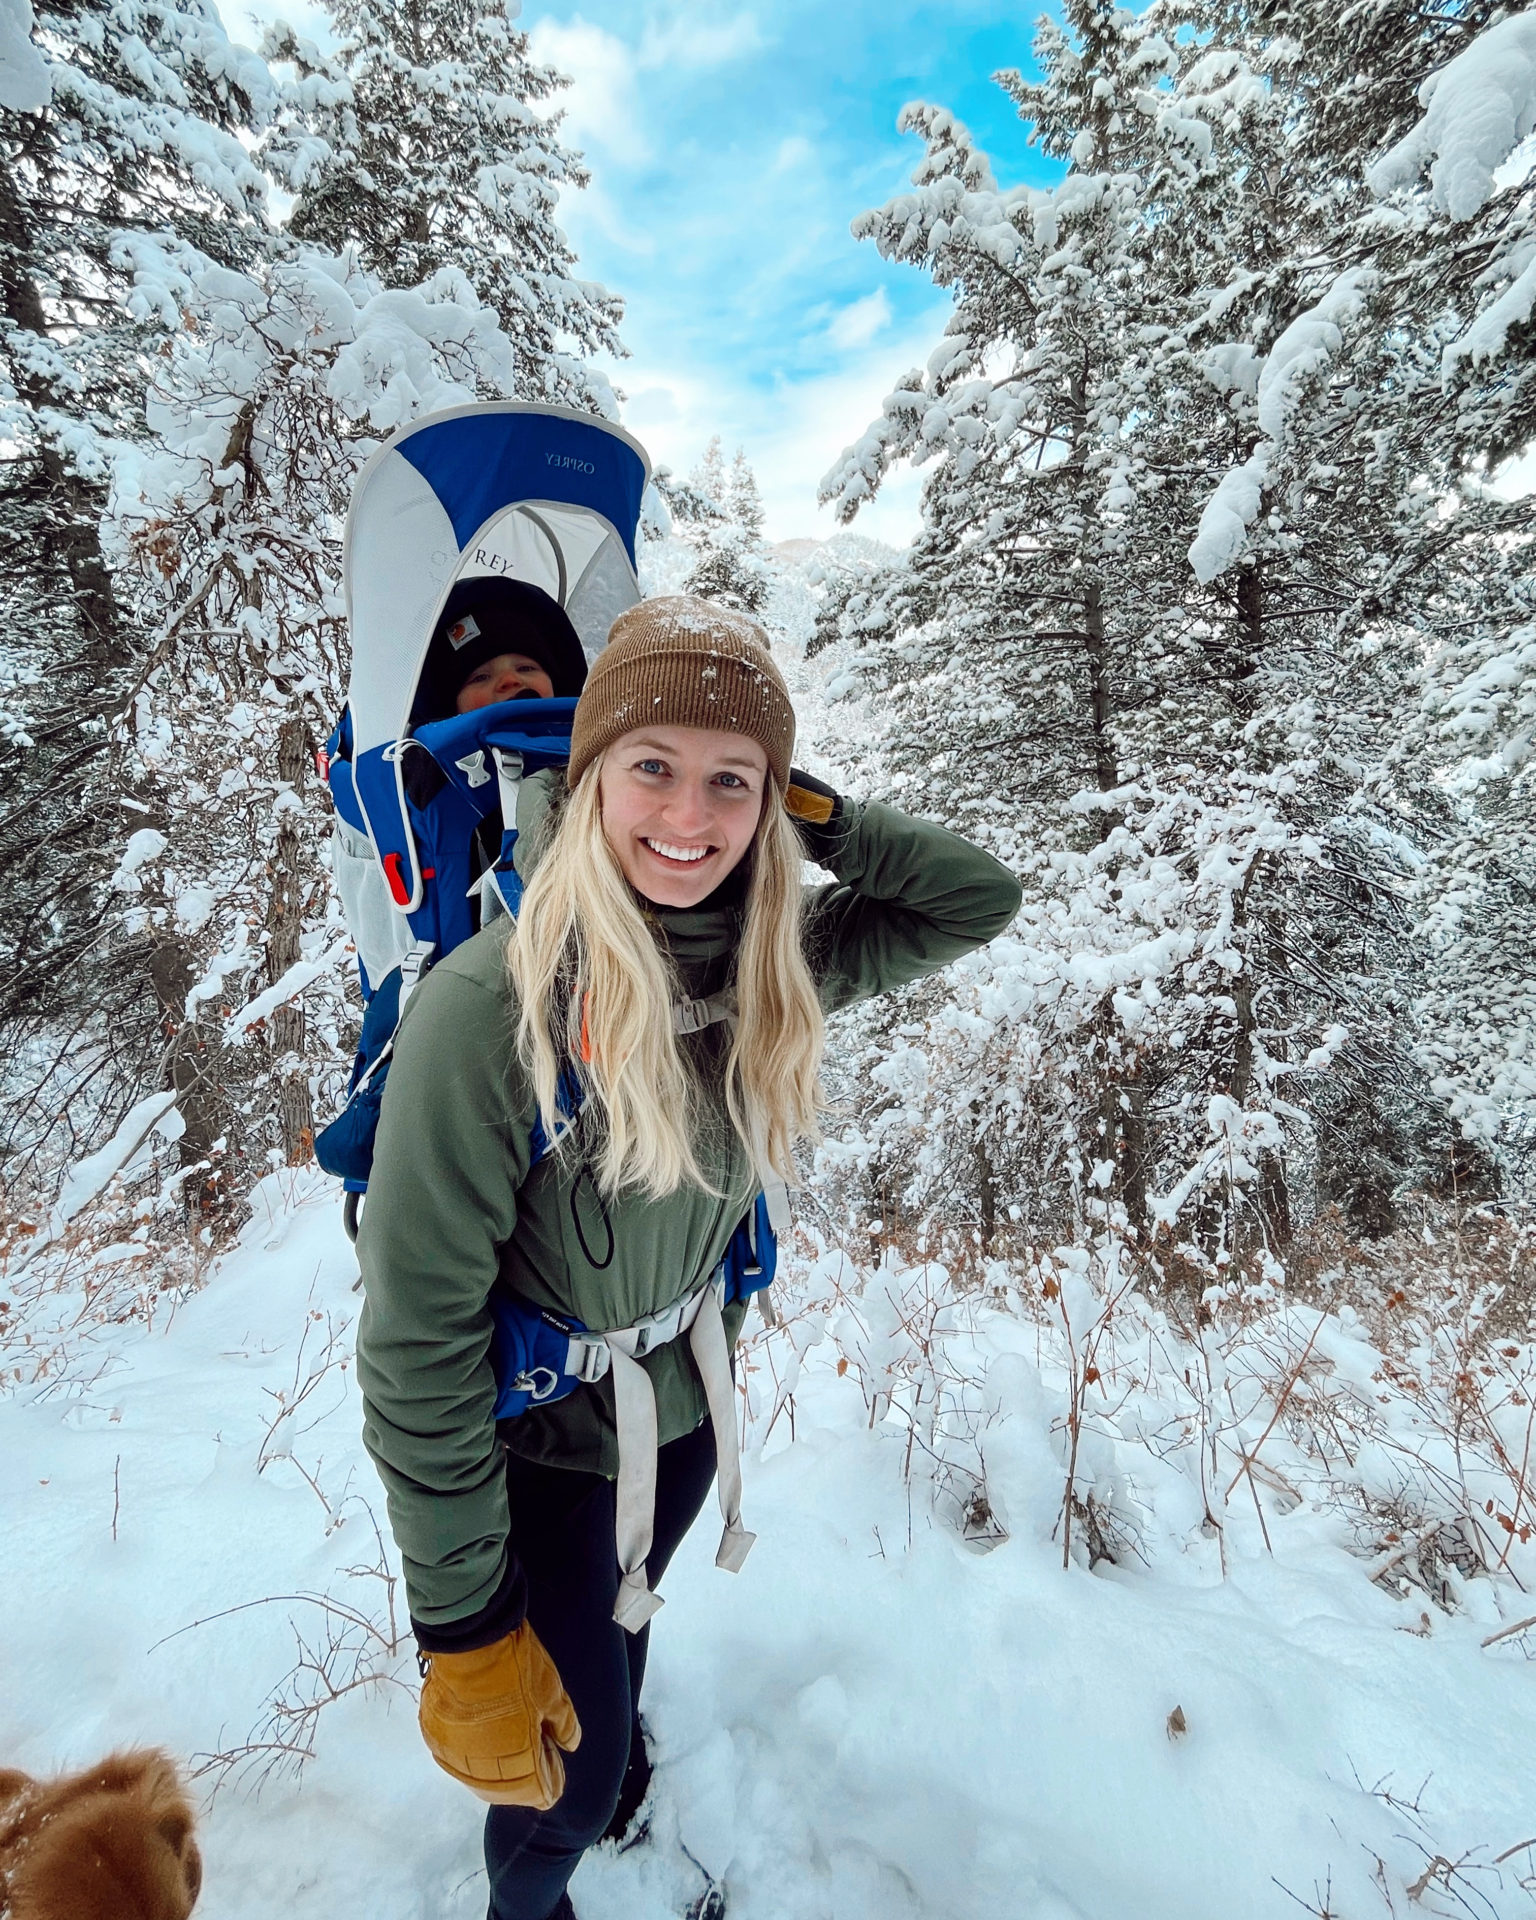 Winter Hiking for Beginners: What To Wear Winter Hiking - Out & Across